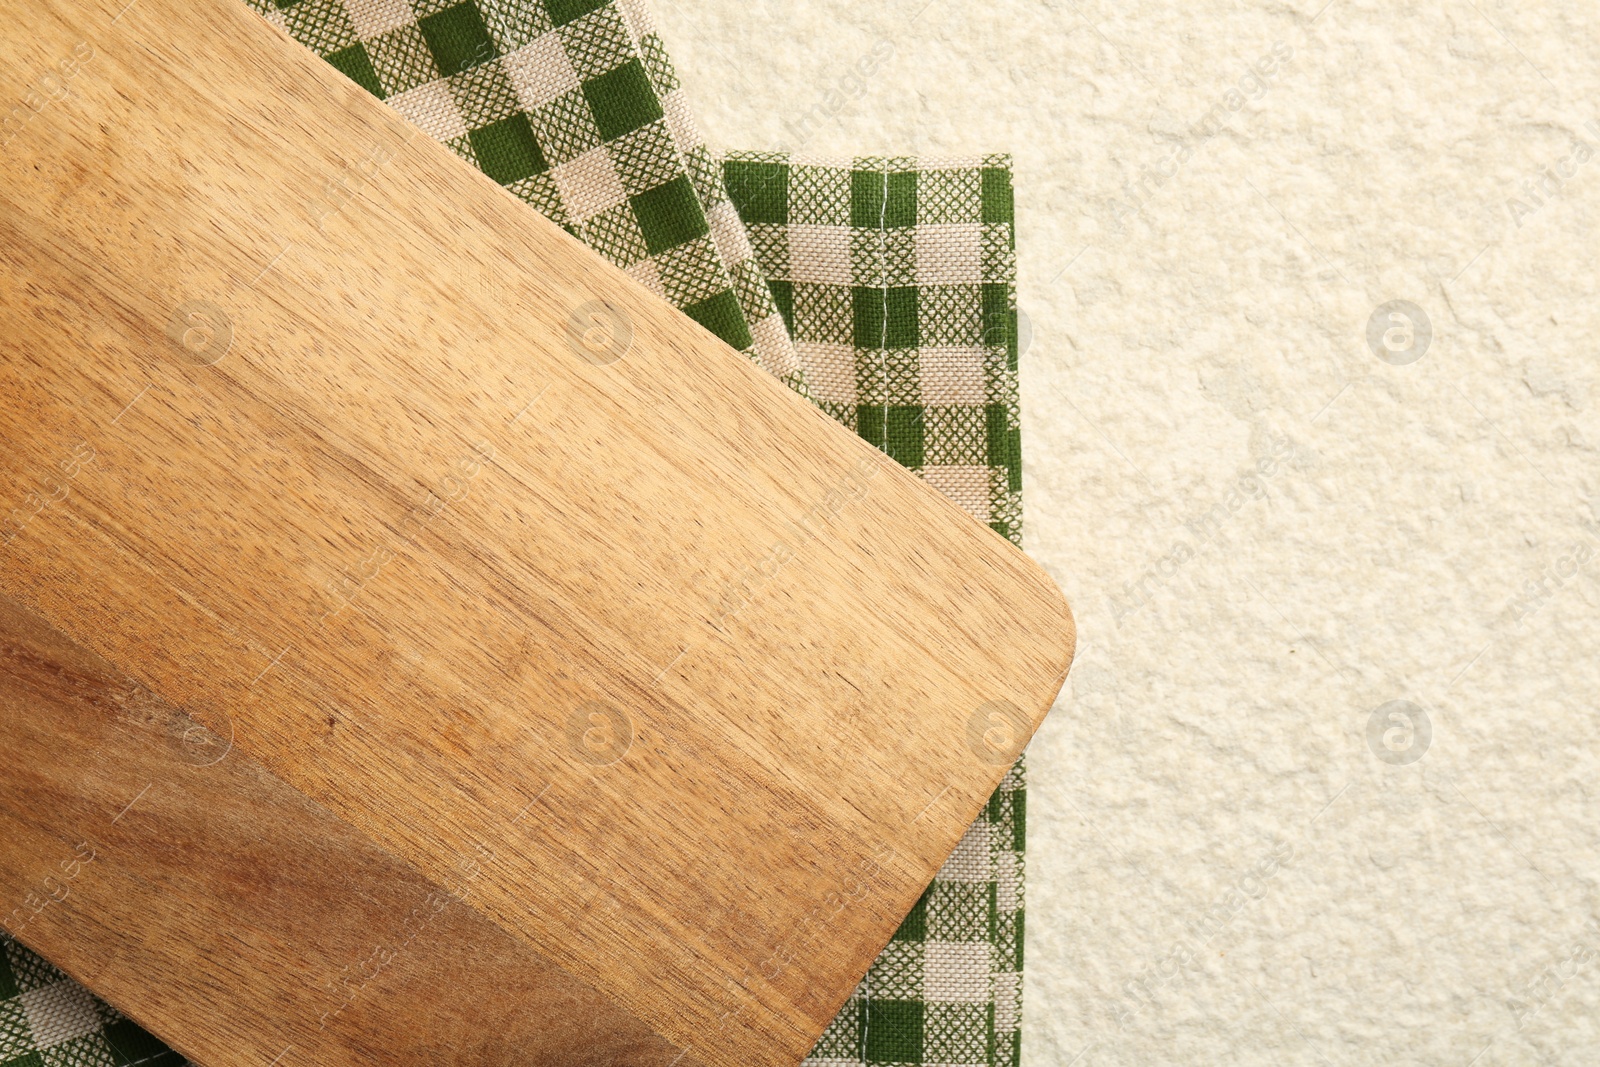 Photo of Wooden cutting board and napkin on beige table, top view. Space for text